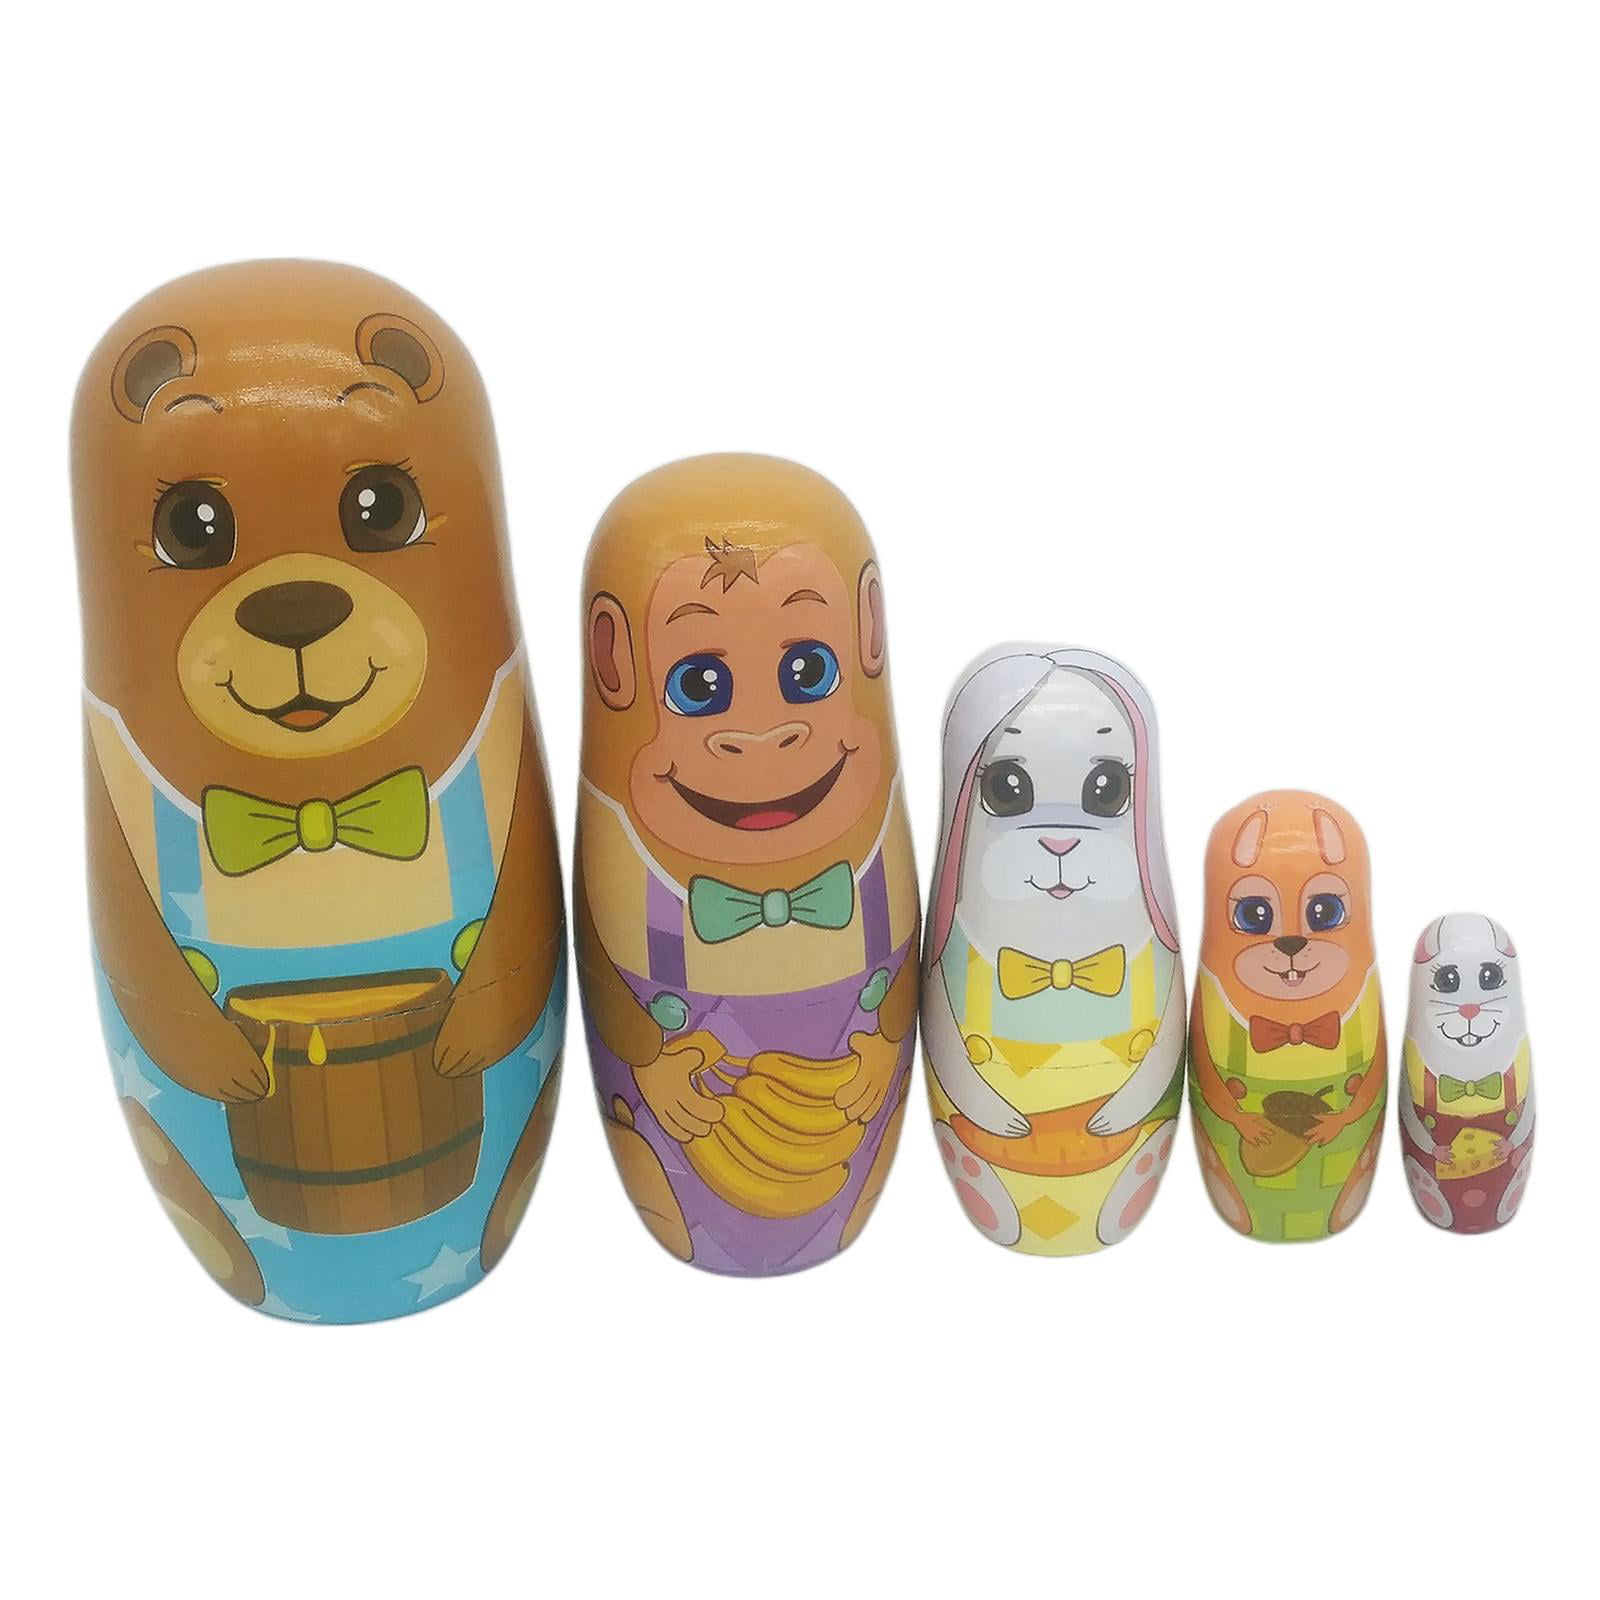 5pcs Wooden Russian Nesting Doll Mini Stacking Toys Cartoon Penguin for Kids 